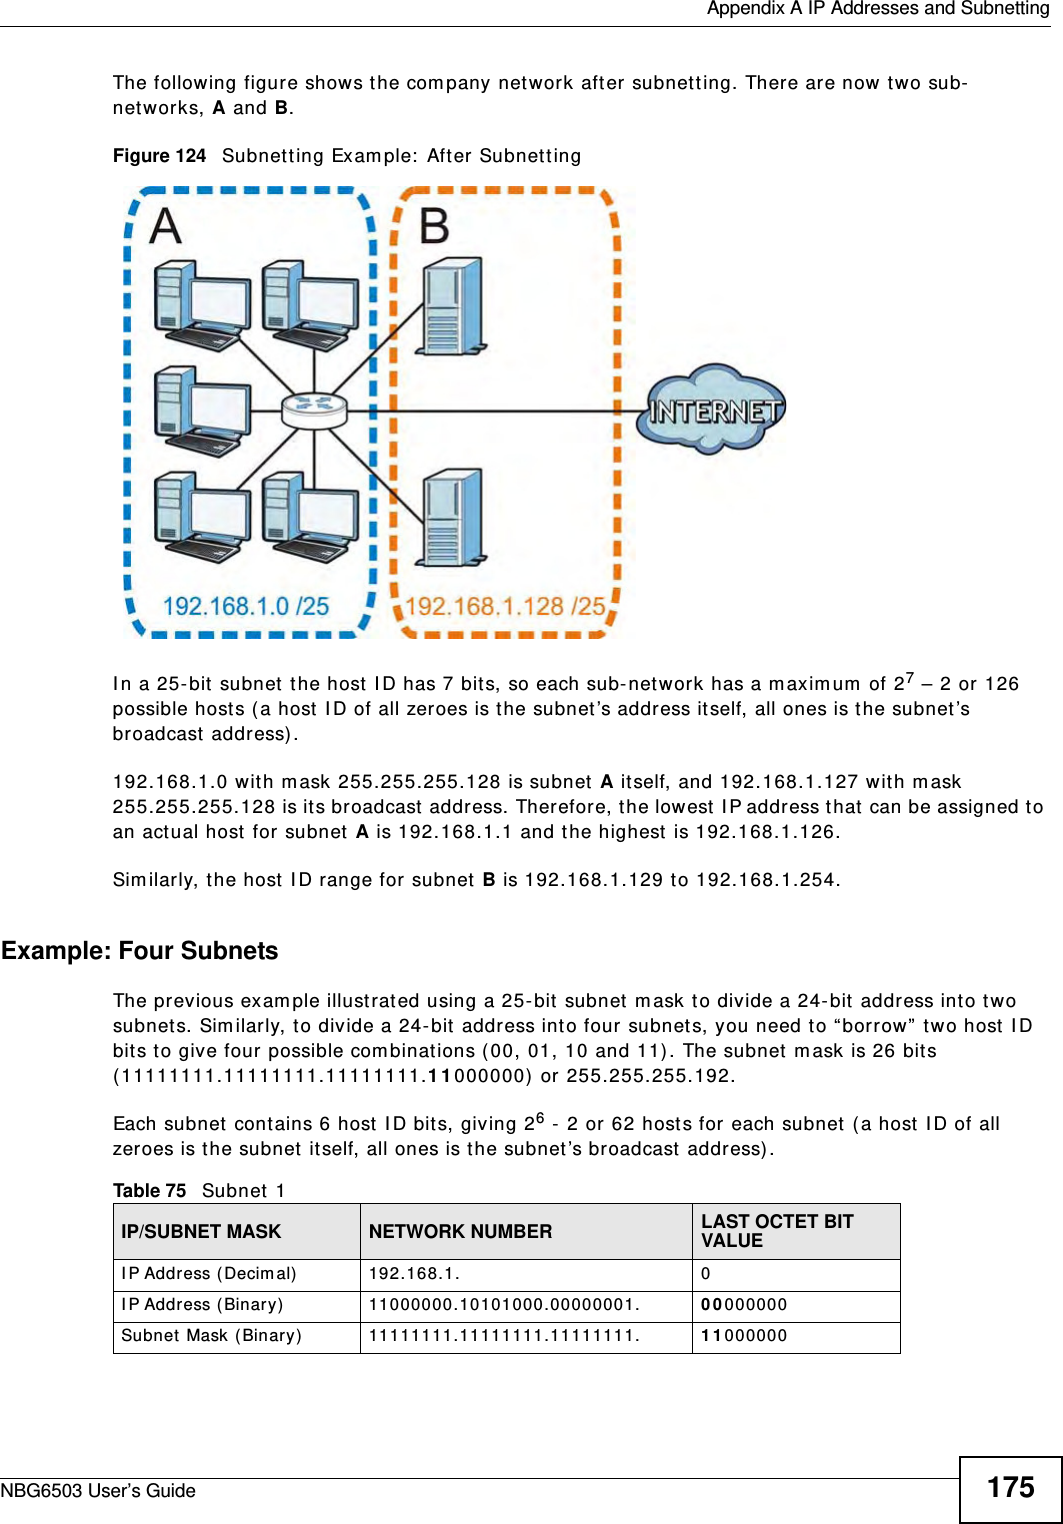  Appendix A IP Addresses and SubnettingNBG6503 User’s Guide 175The following figure shows the company network after subnetting. There are now two sub-networks, A and B. Figure 124   Subnetting Example: After SubnettingIn a 25-bit subnet the host ID has 7 bits, so each sub-network has a maximum of 27 – 2 or 126 possible hosts (a host ID of all zeroes is the subnet’s address itself, all ones is the subnet’s broadcast address).192.168.1.0 with mask 255.255.255.128 is subnet A itself, and 192.168.1.127 with mask 255.255.255.128 is its broadcast address. Therefore, the lowest IP address that can be assigned to an actual host for subnet A is 192.168.1.1 and the highest is 192.168.1.126. Similarly, the host ID range for subnet B is 192.168.1.129 to 192.168.1.254.Example: Four Subnets The previous example illustrated using a 25-bit subnet mask to divide a 24-bit address into two subnets. Similarly, to divide a 24-bit address into four subnets, you need to “borrow” two host ID bits to give four possible combinations (00, 01, 10 and 11). The subnet mask is 26 bits (11111111.11111111.11111111.11000000) or 255.255.255.192. Each subnet contains 6 host ID bits, giving 26 - 2 or 62 hosts for each subnet (a host ID of all zeroes is the subnet itself, all ones is the subnet’s broadcast address). Table 75   Subnet 1IP/SUBNET MASK NETWORK NUMBER LAST OCTET BIT VALUEIP Address (Decimal) 192.168.1. 0IP Address (Binary) 11000000.10101000.00000001. 00000000Subnet Mask (Binary) 11111111.11111111.11111111. 11000000